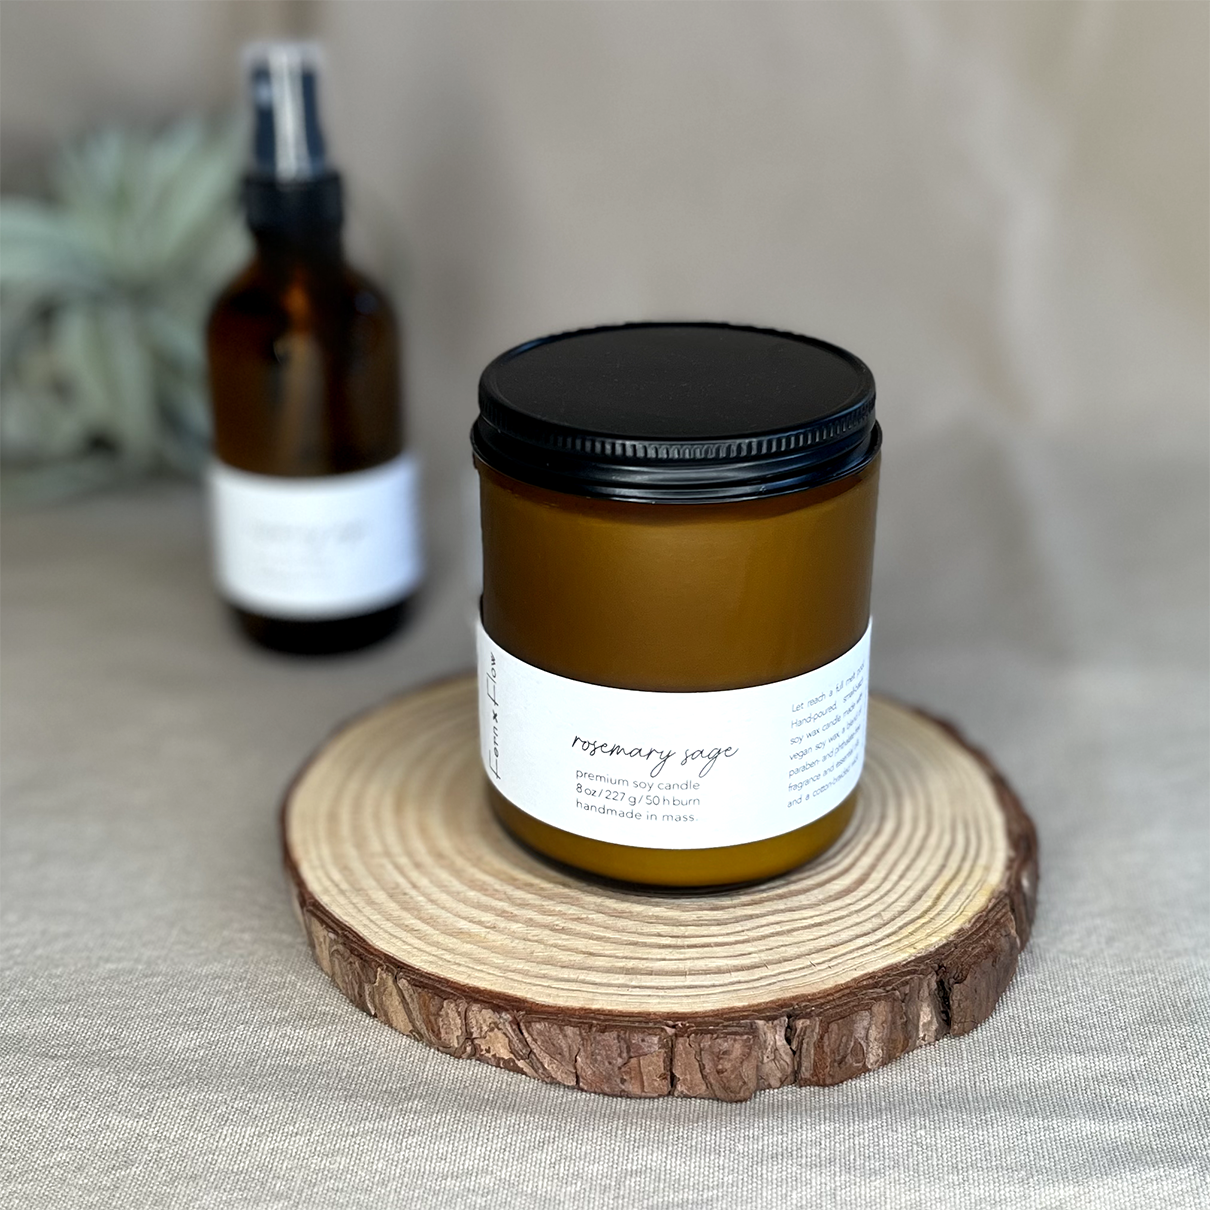 Fern x Flow Rosemary Sage vegan soy candle and air + linen spray fragrance bundle on a rustic wooden riser.